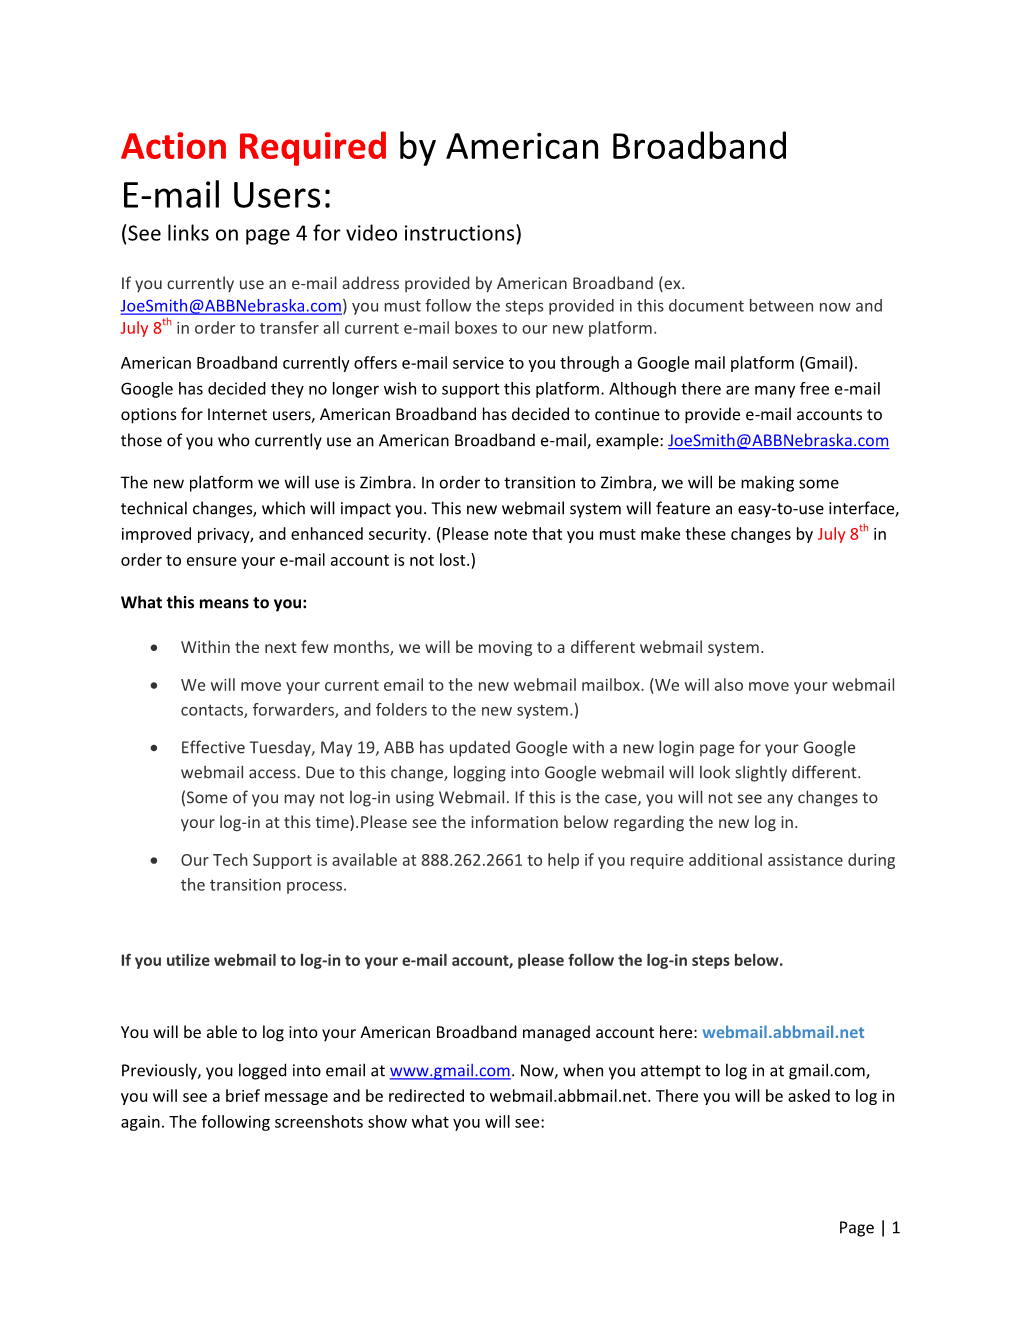 Action Required by American Broadband E-Mail Users: (See Links on Page 4 for Video Instructions)